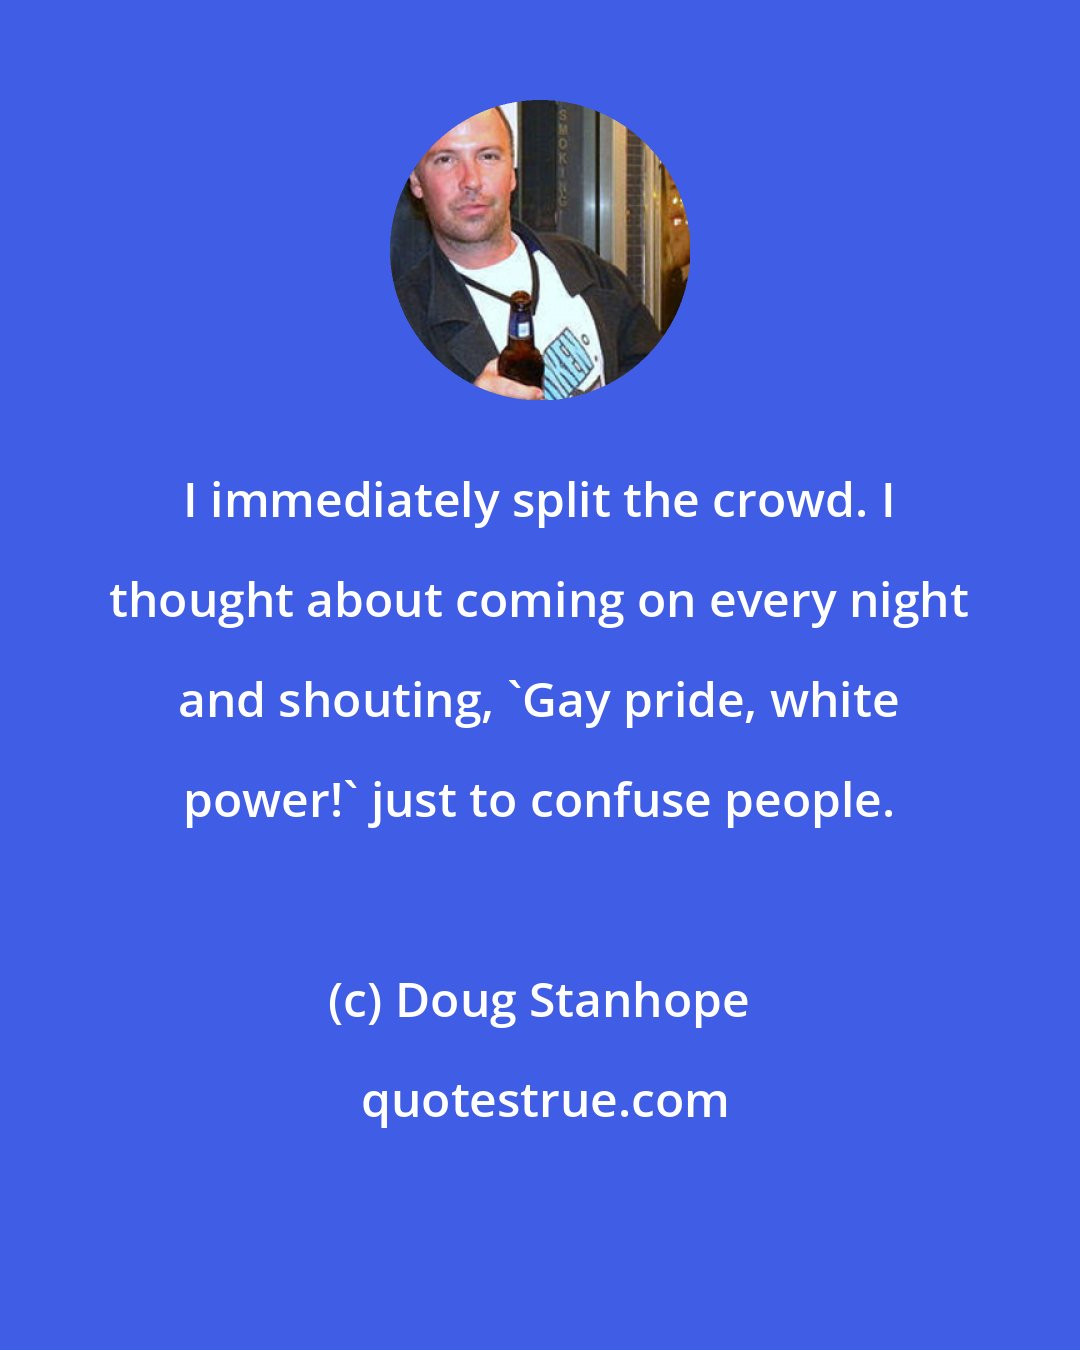 Doug Stanhope: I immediately split the crowd. I thought about coming on every night and shouting, 'Gay pride, white power!' just to confuse people.